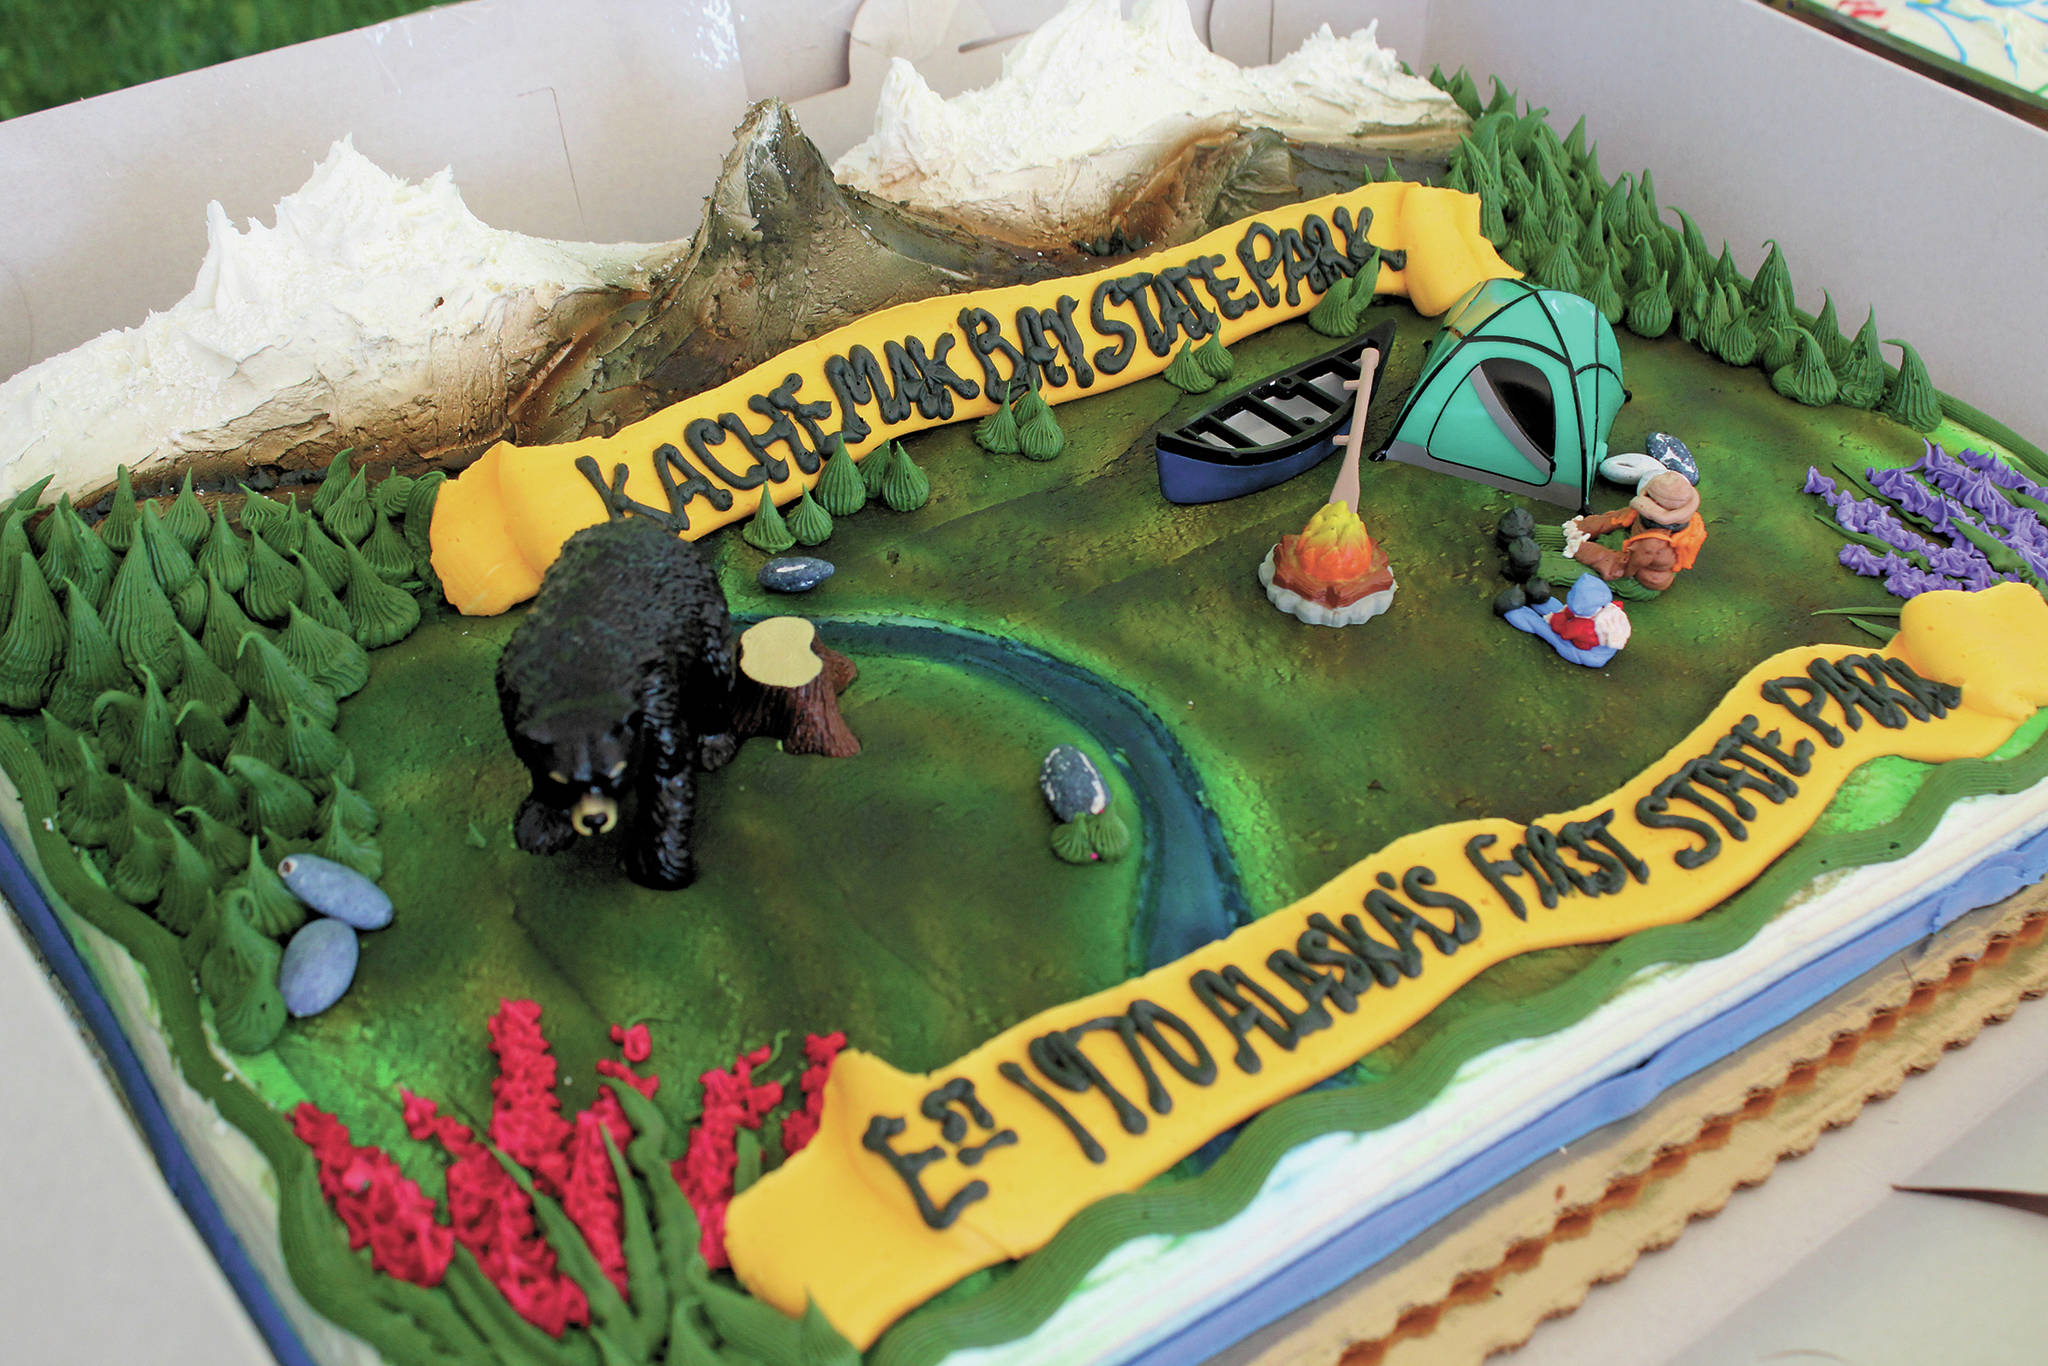 A special 50th anniversary cake sits waiting to be cut at a celebration for Kachemak Bay State Park on Saturday, June 6, 2020 at the Homer Chamber of Commerce & Visitor Center in Homer, Alaska. (Photo by Megan Pacer/Homer News)